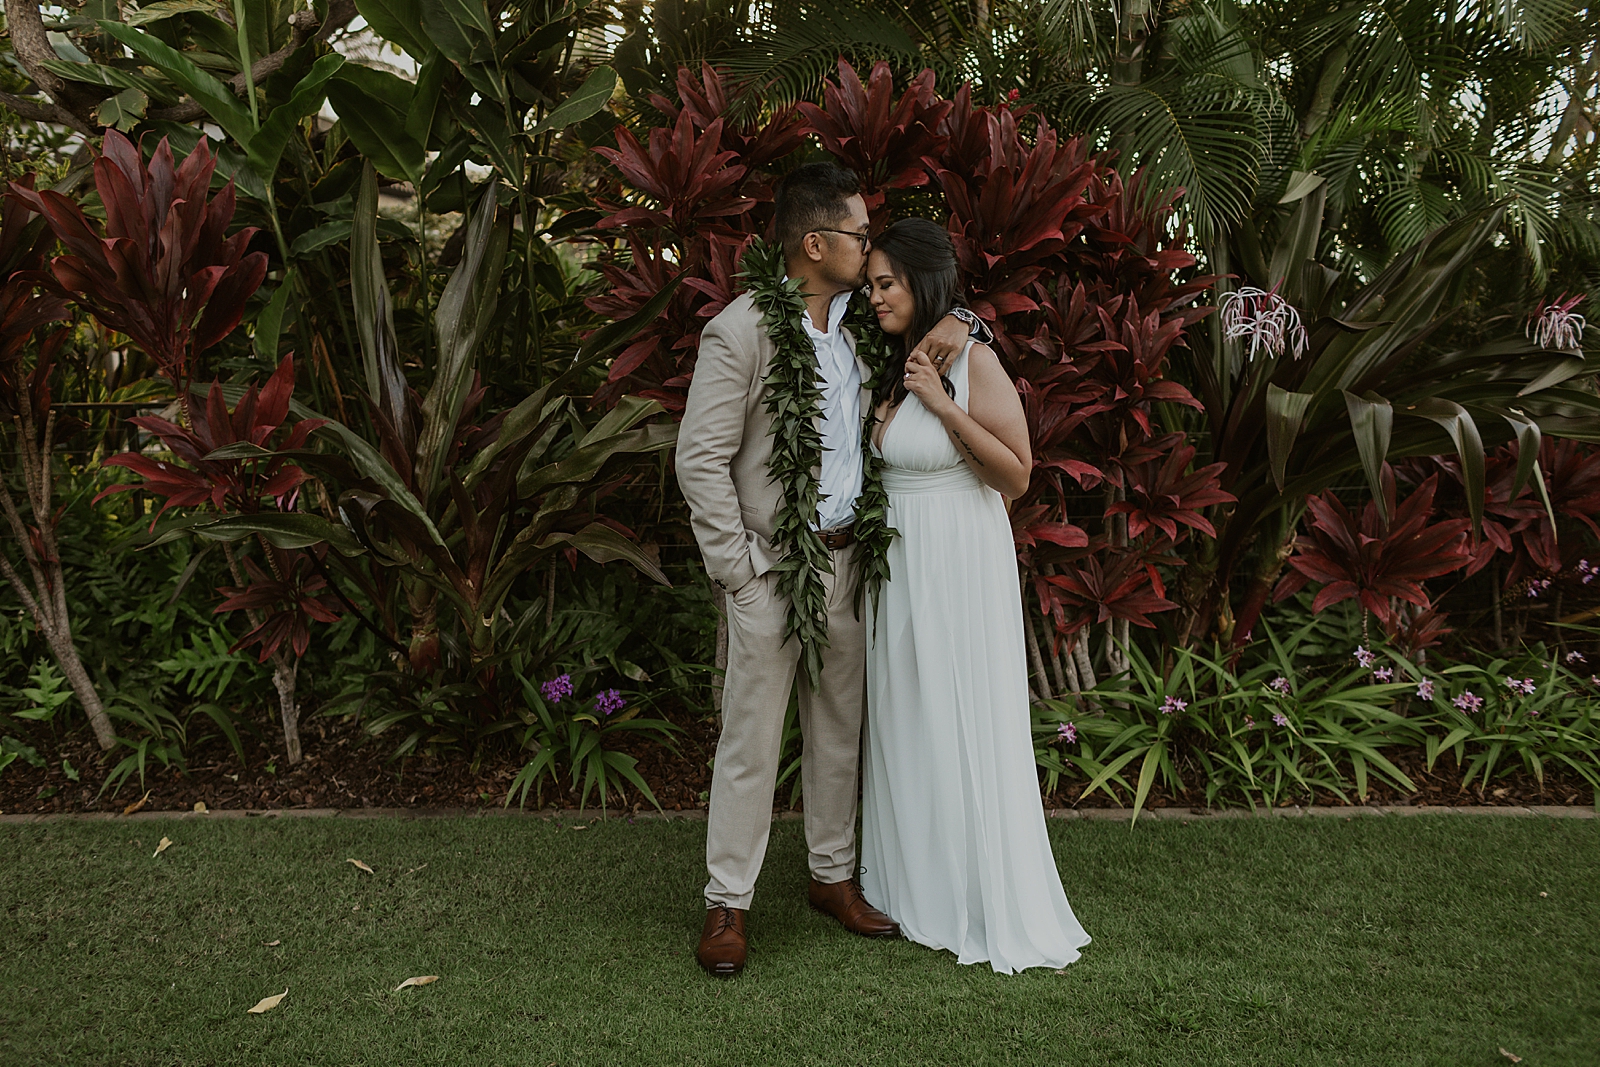 Groom kissing Bride on the forehead in front of greenery